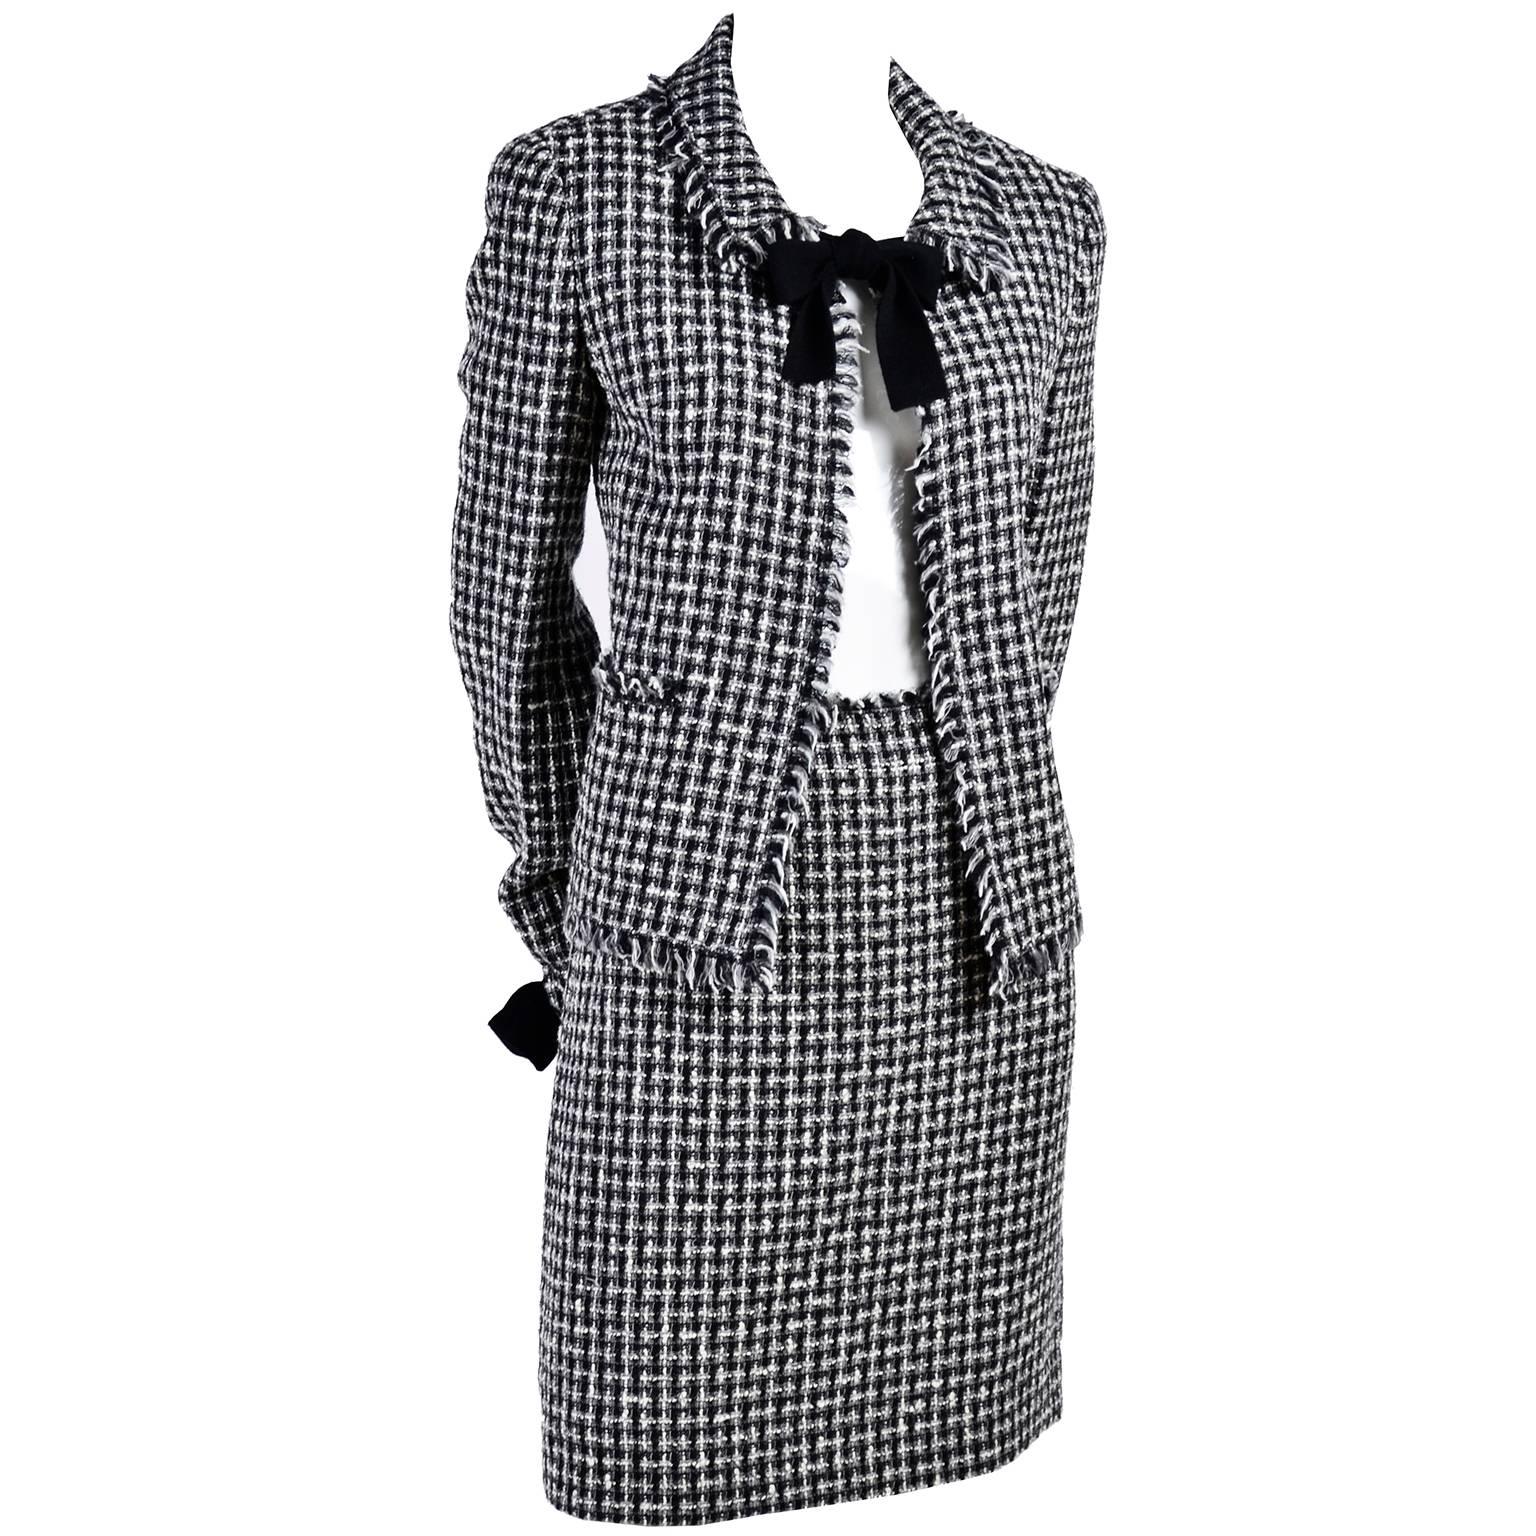 Chanel Black and White Lesage Tweed Suit with Bows and Fringe, 2004